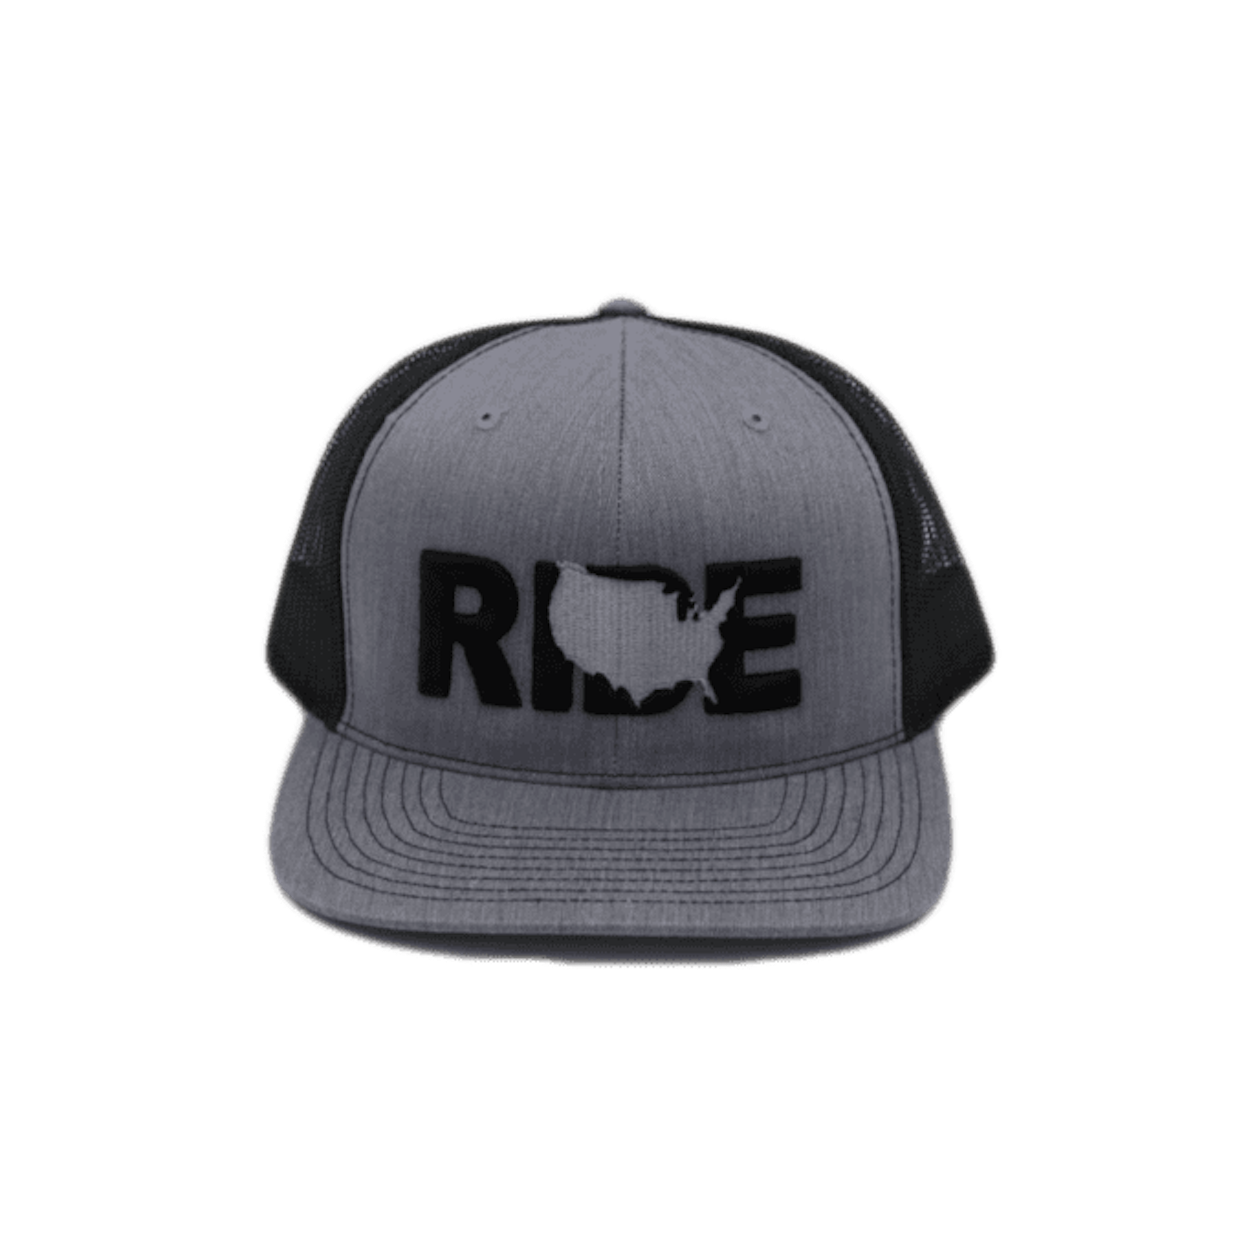 Ride United States Classic Pro 3D Puff Embroidered Snapback Trucker Hat Heather Gray/Black